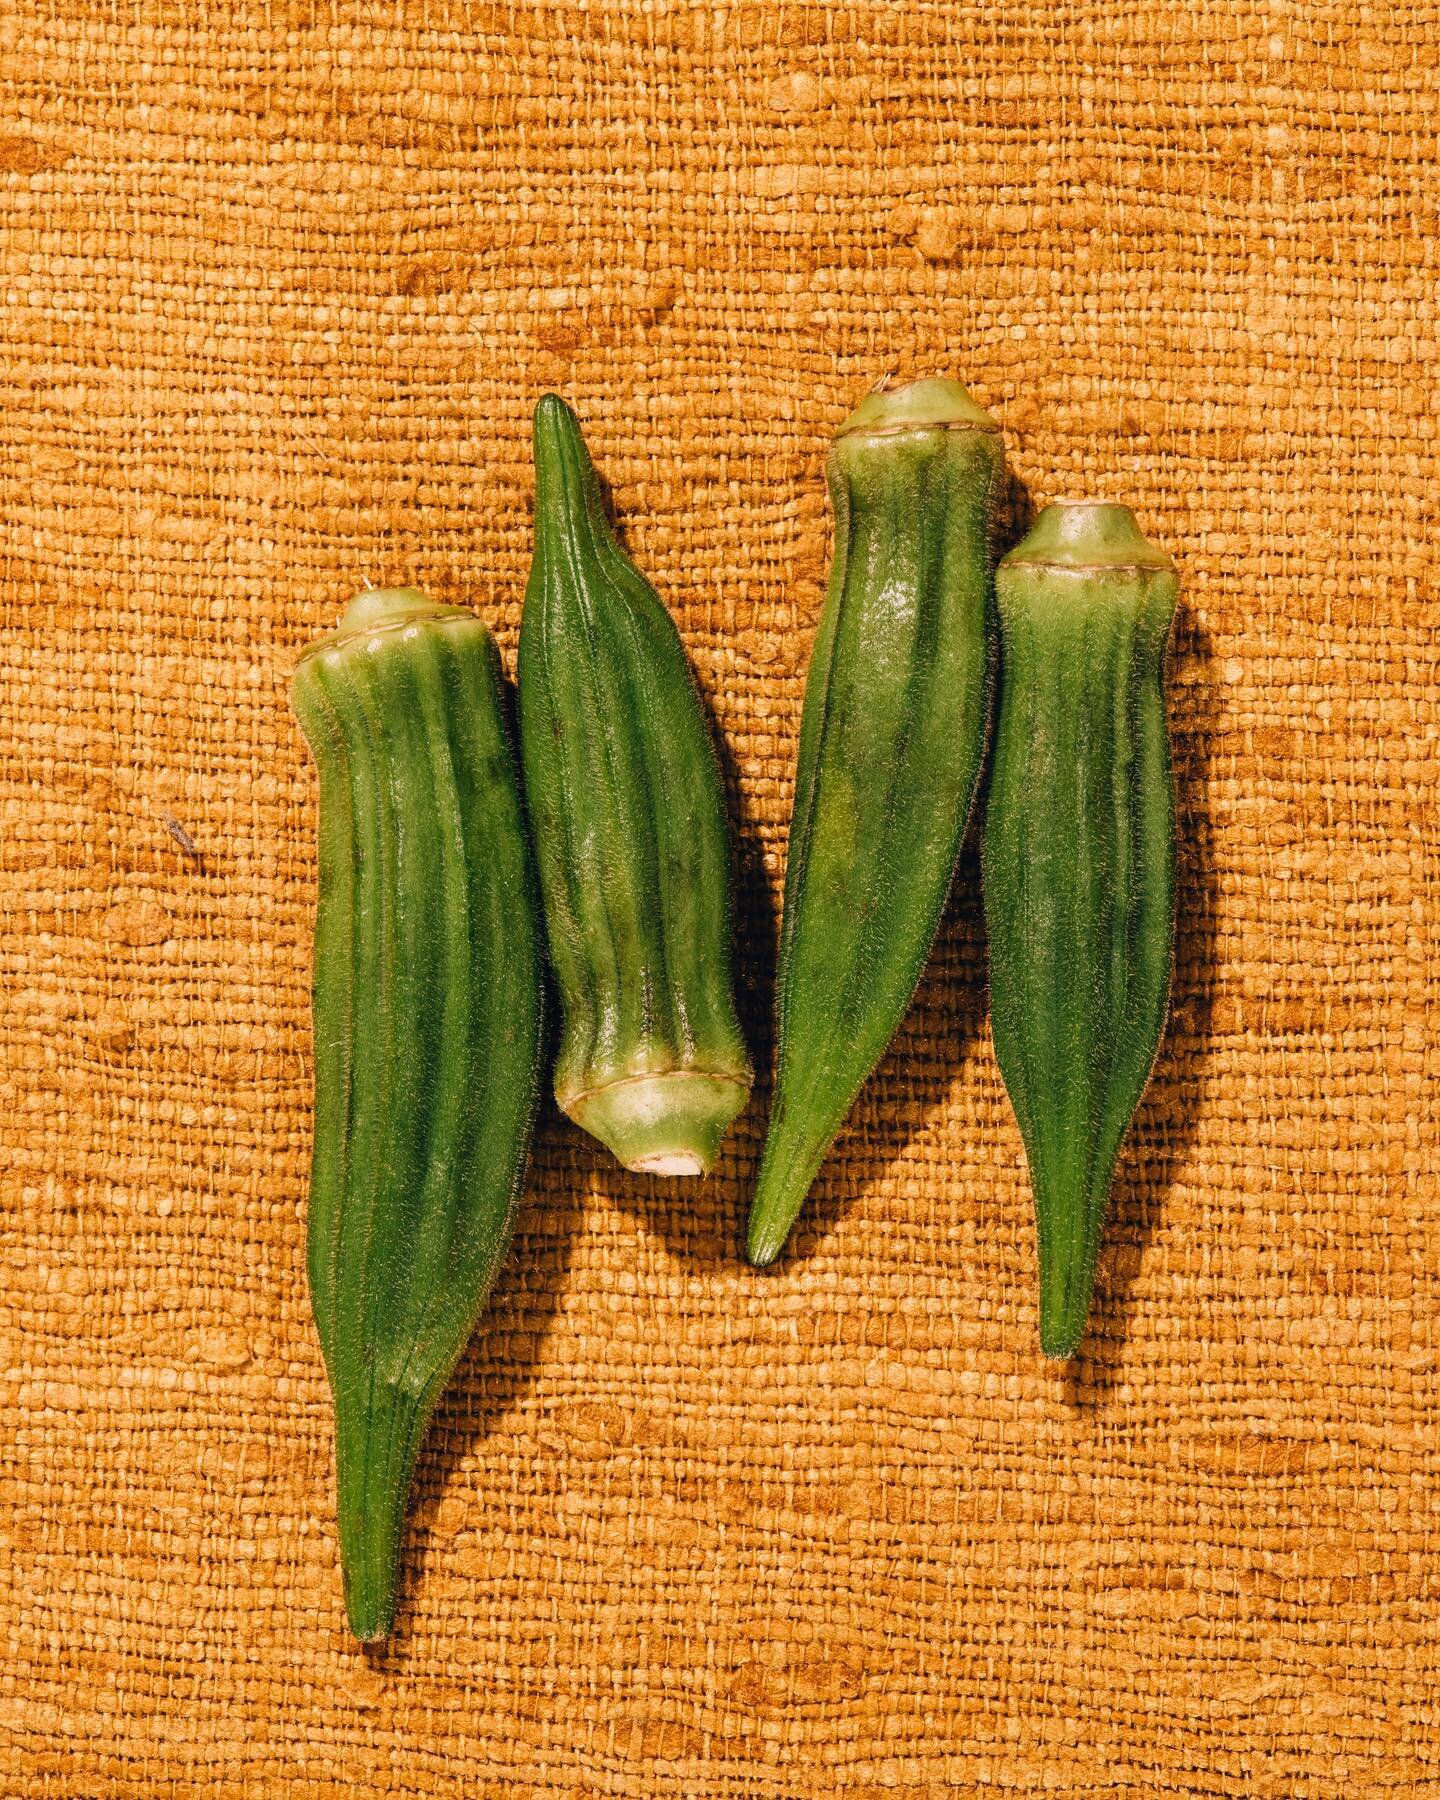 At our essence, we aspire to tell stories through our food.  From Africa, through the Middle Passage, and to the world, crops like okra tell a unique cultural story through dishes like gumbo, soupe kandja and so many more. On our menu you can find ok